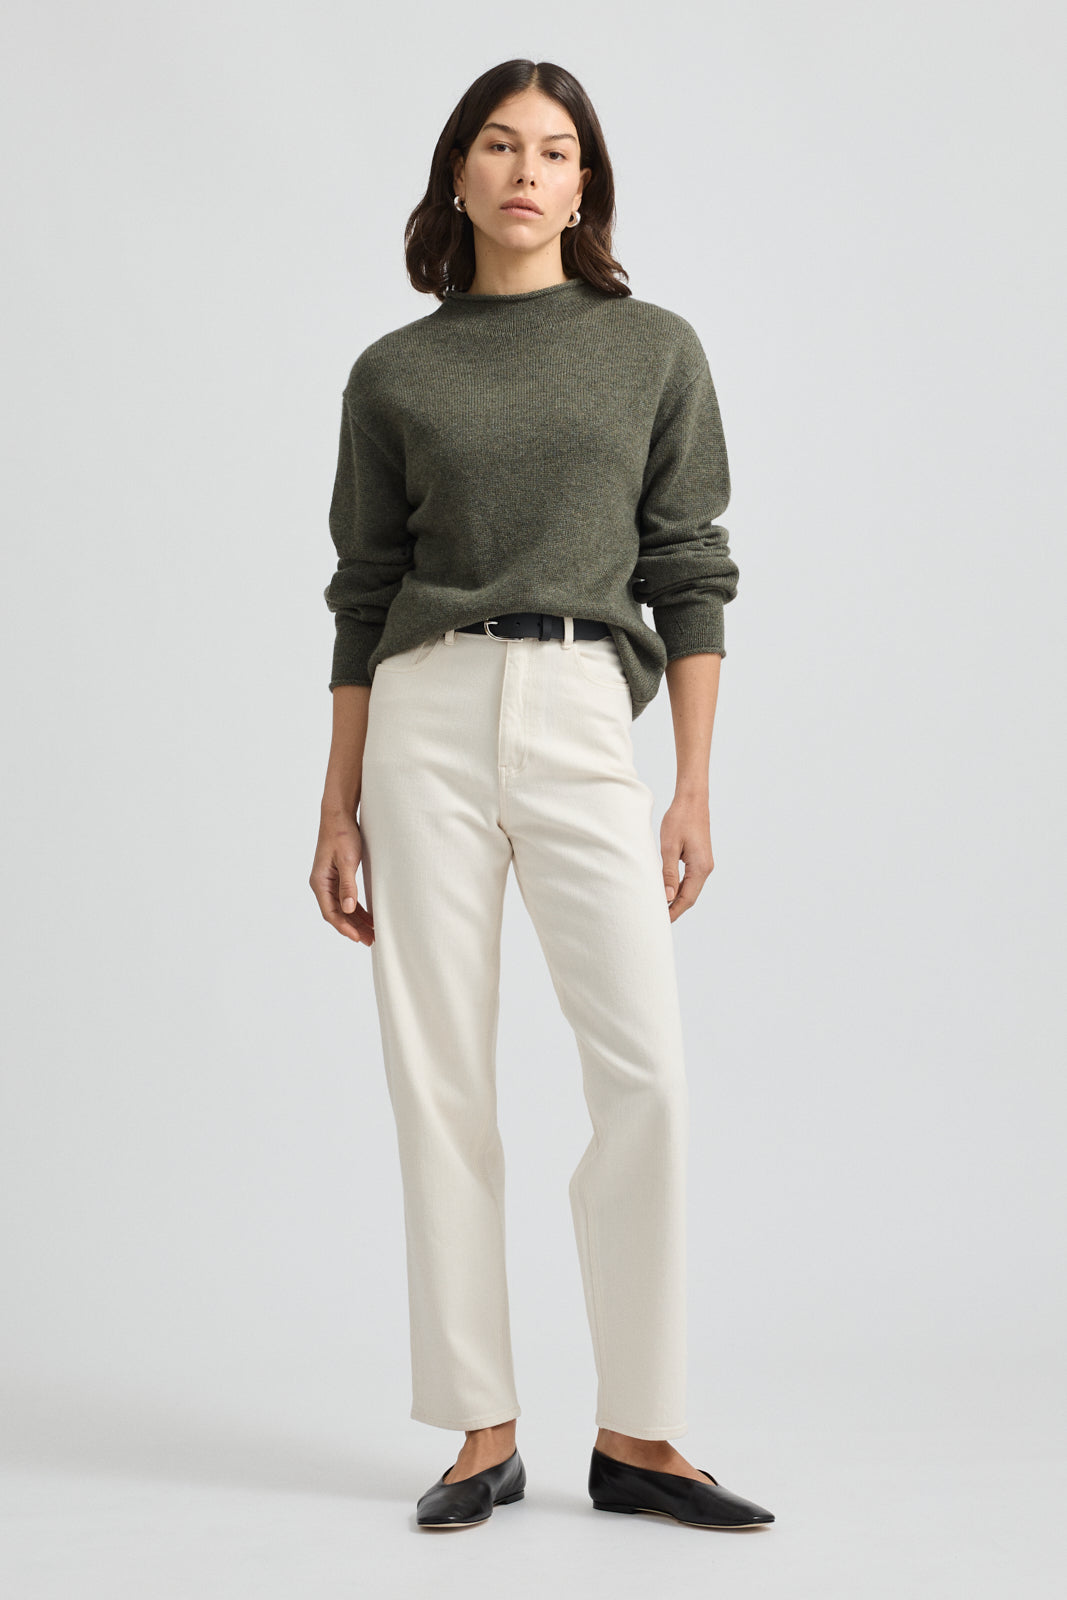 TOORALLIE RELAXED FIT MOCK NECK